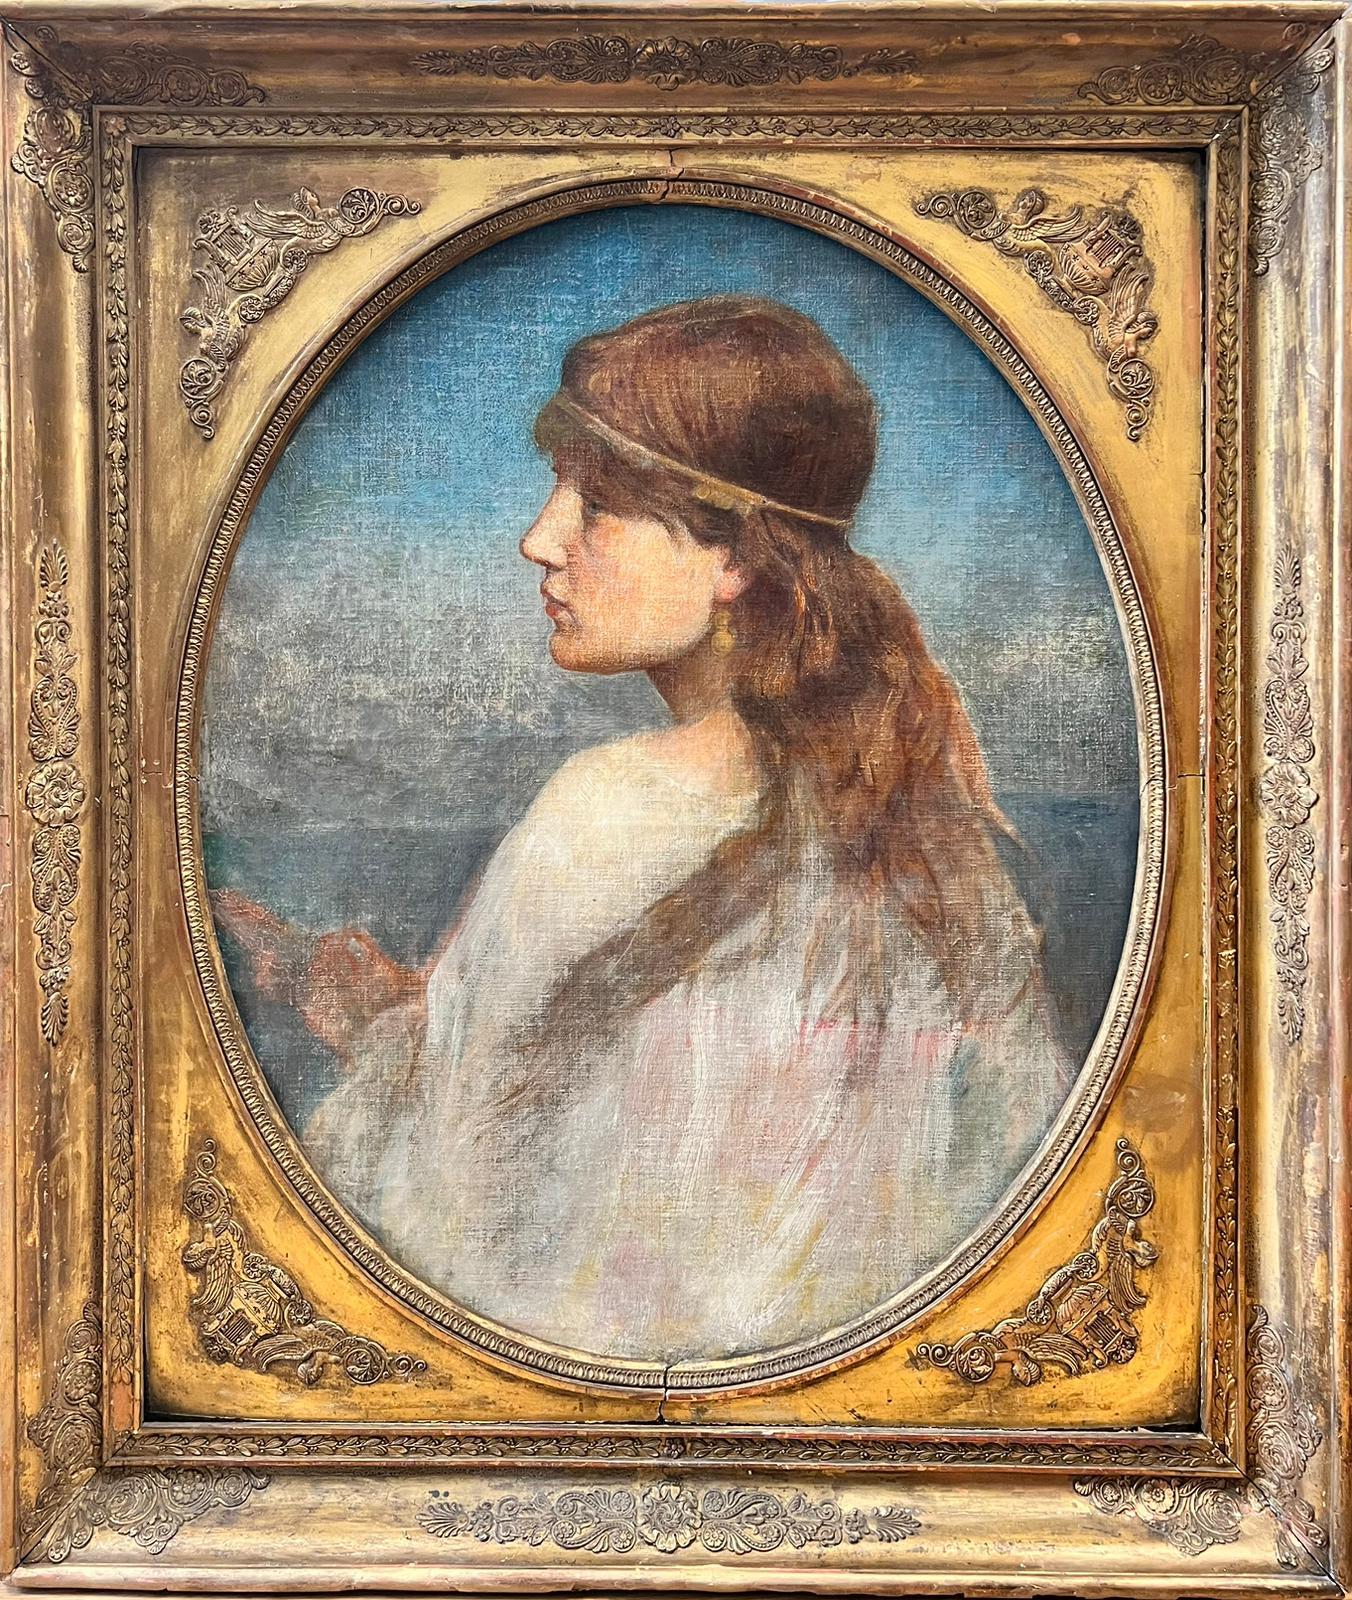 English Pre-Raphaelite artist from the late 19th century
the work is slightly sketchy in appearance suggesting it was possibly an unfinished work or preparatory painting in advance of more finished work. 
oil painting on canvas, framed in original